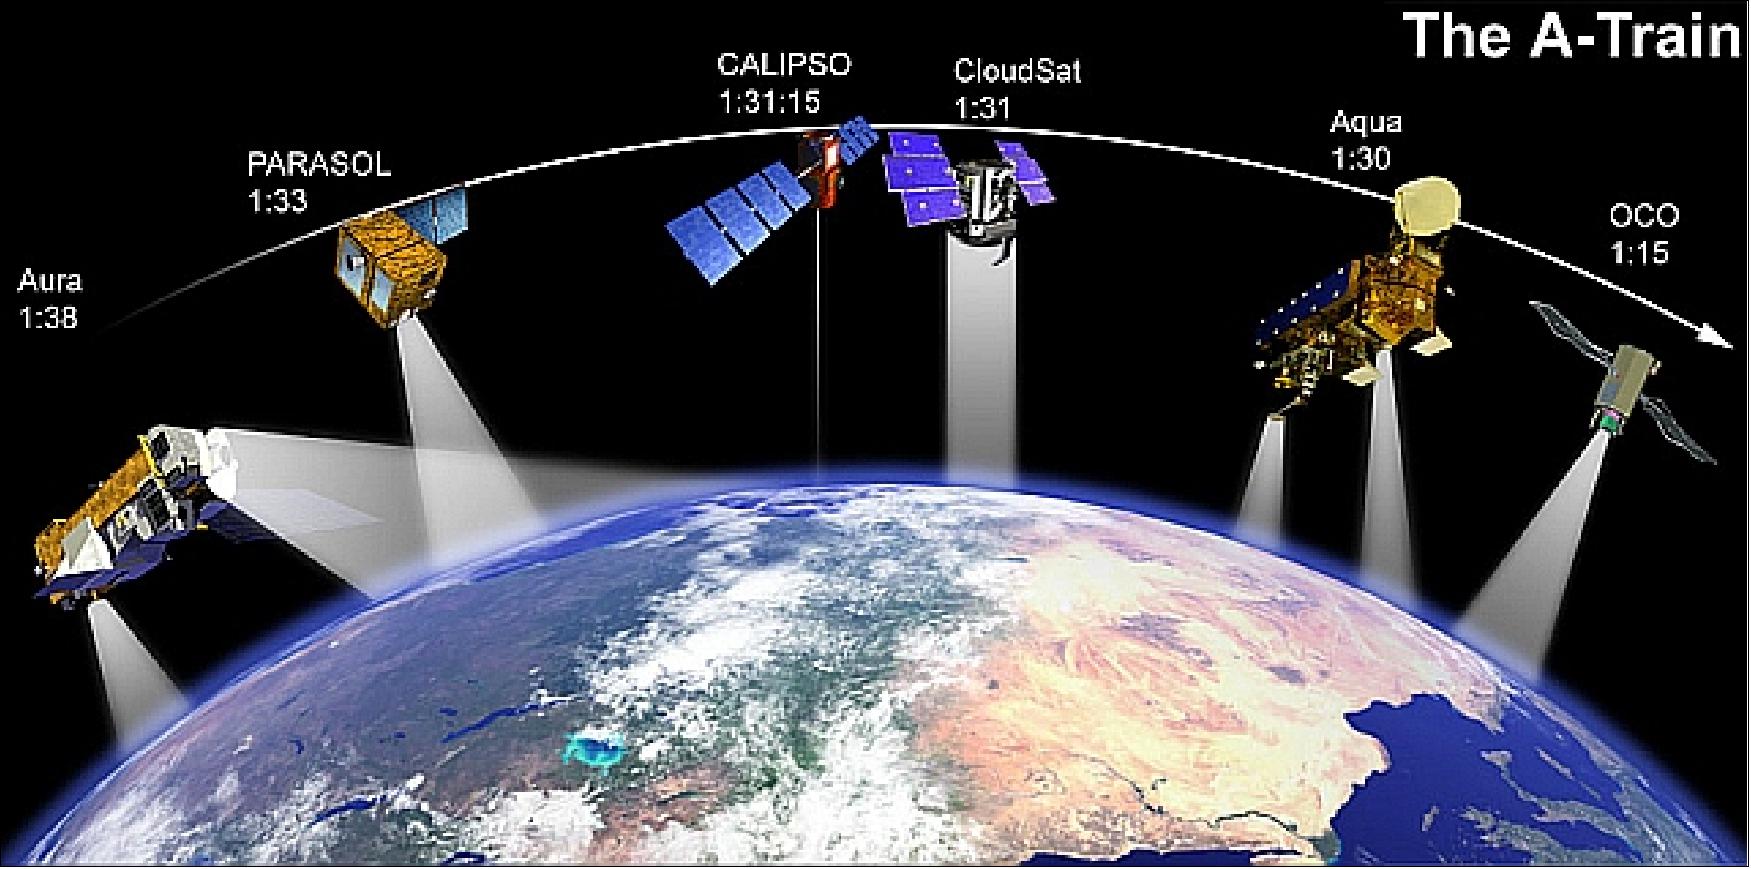 Figure 4: Illustration of Aura spacecraft in the A-train (image credit: NASA)